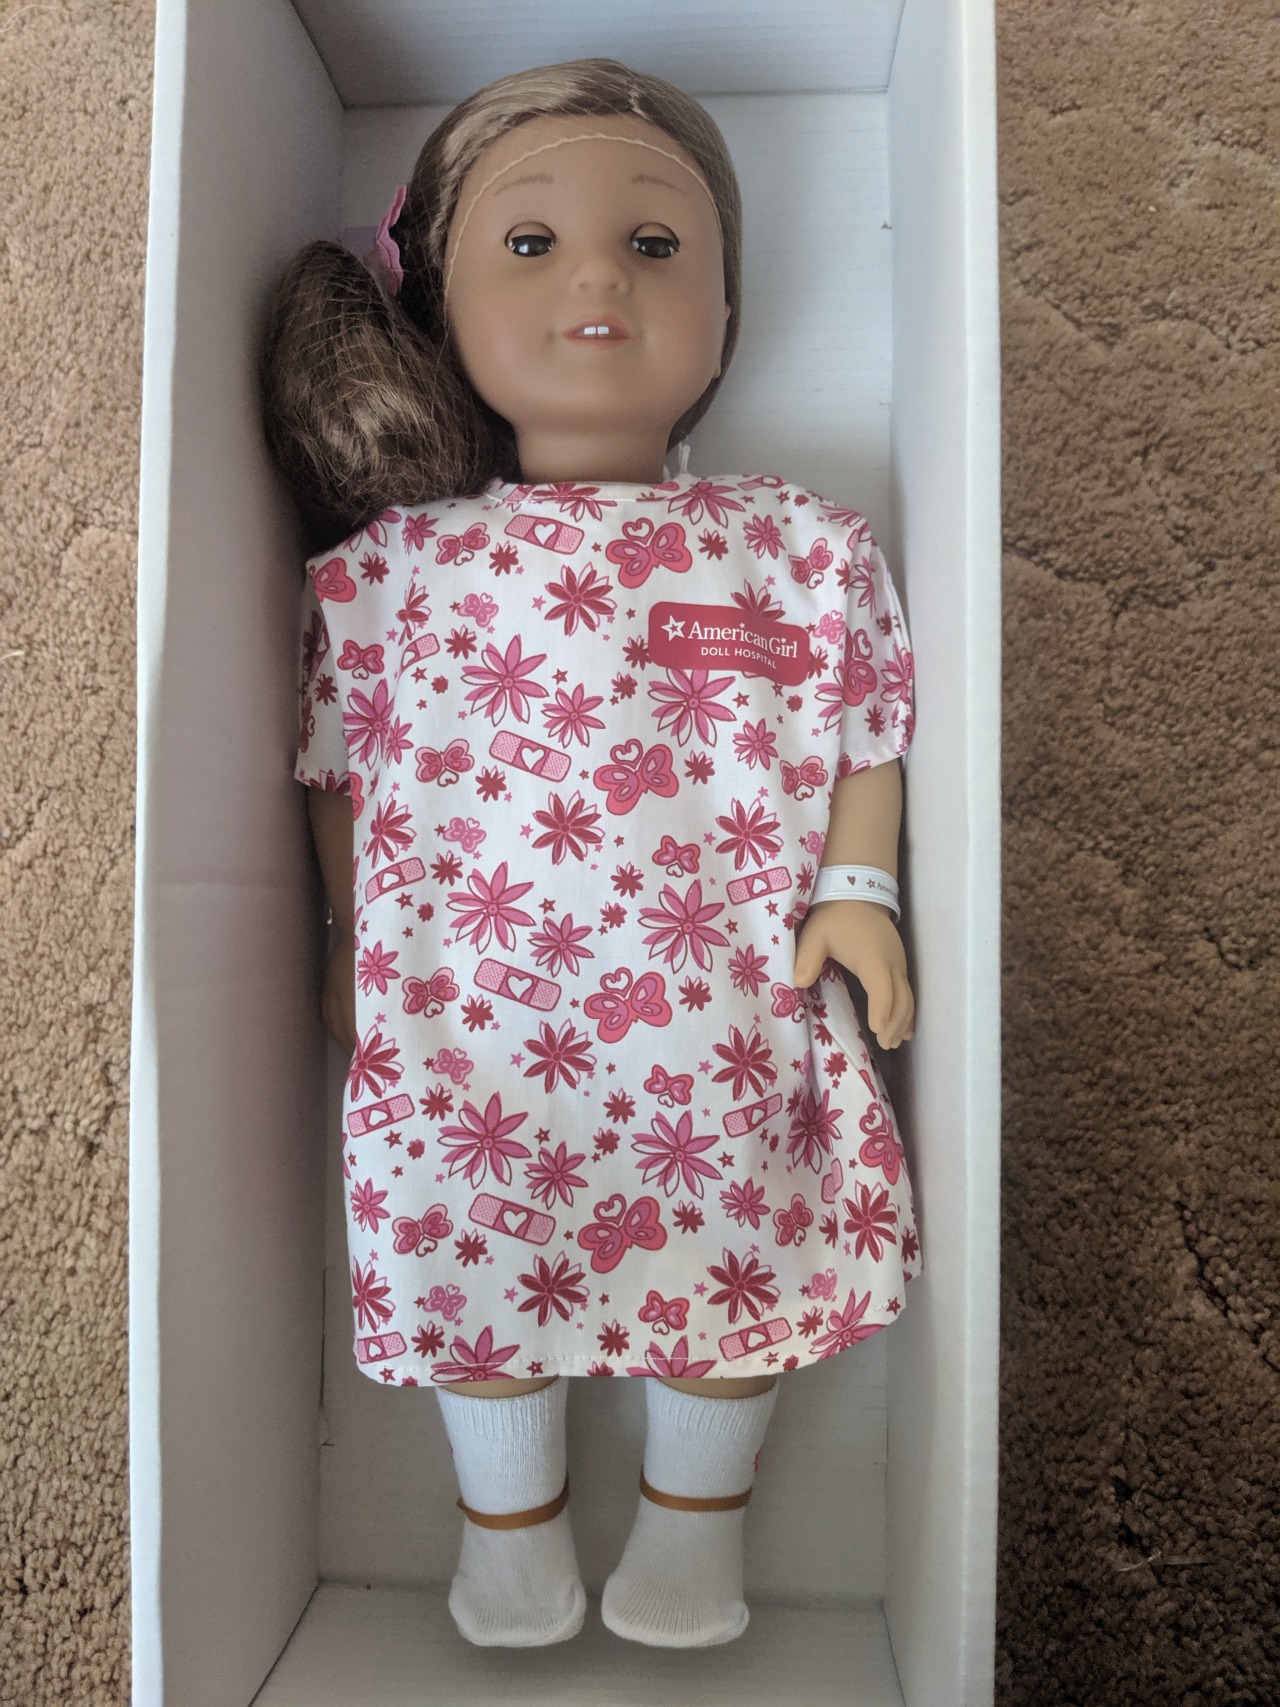 american me doll price